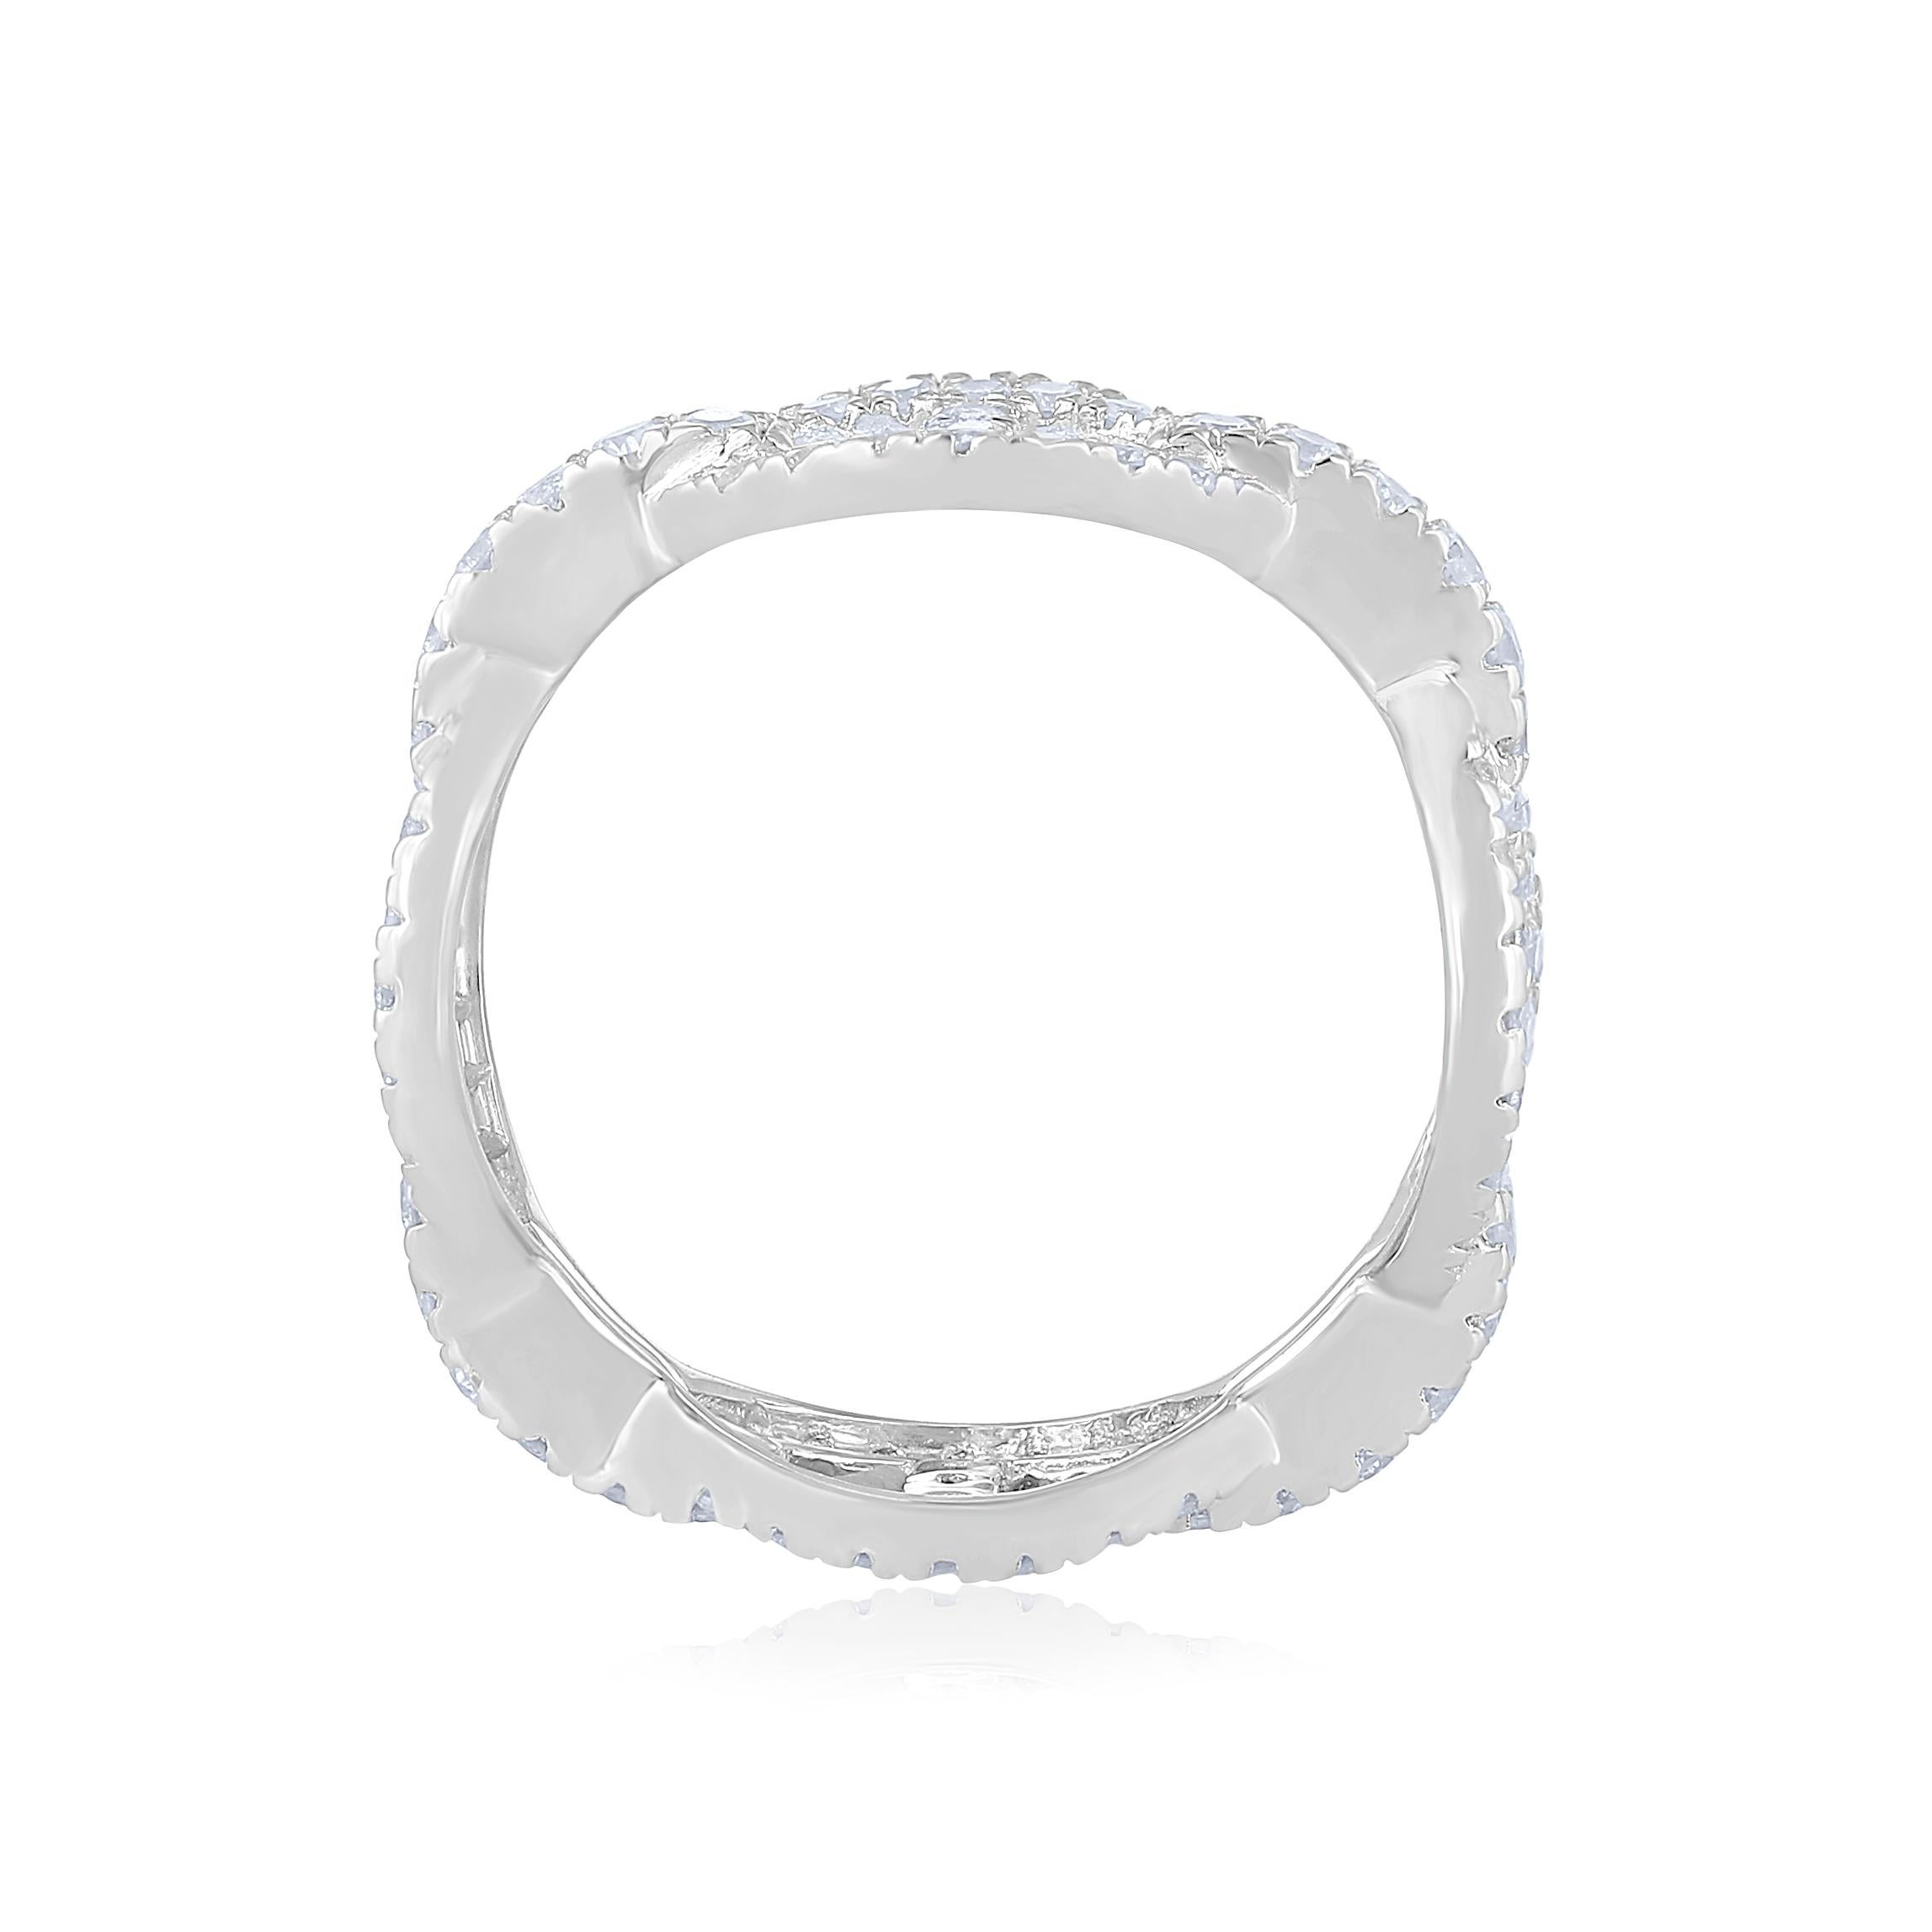 Contemporary Gemistry 0.98 Carat. T.W. Diamond Eternity Band Ring in 925 Sterling Silver For Sale